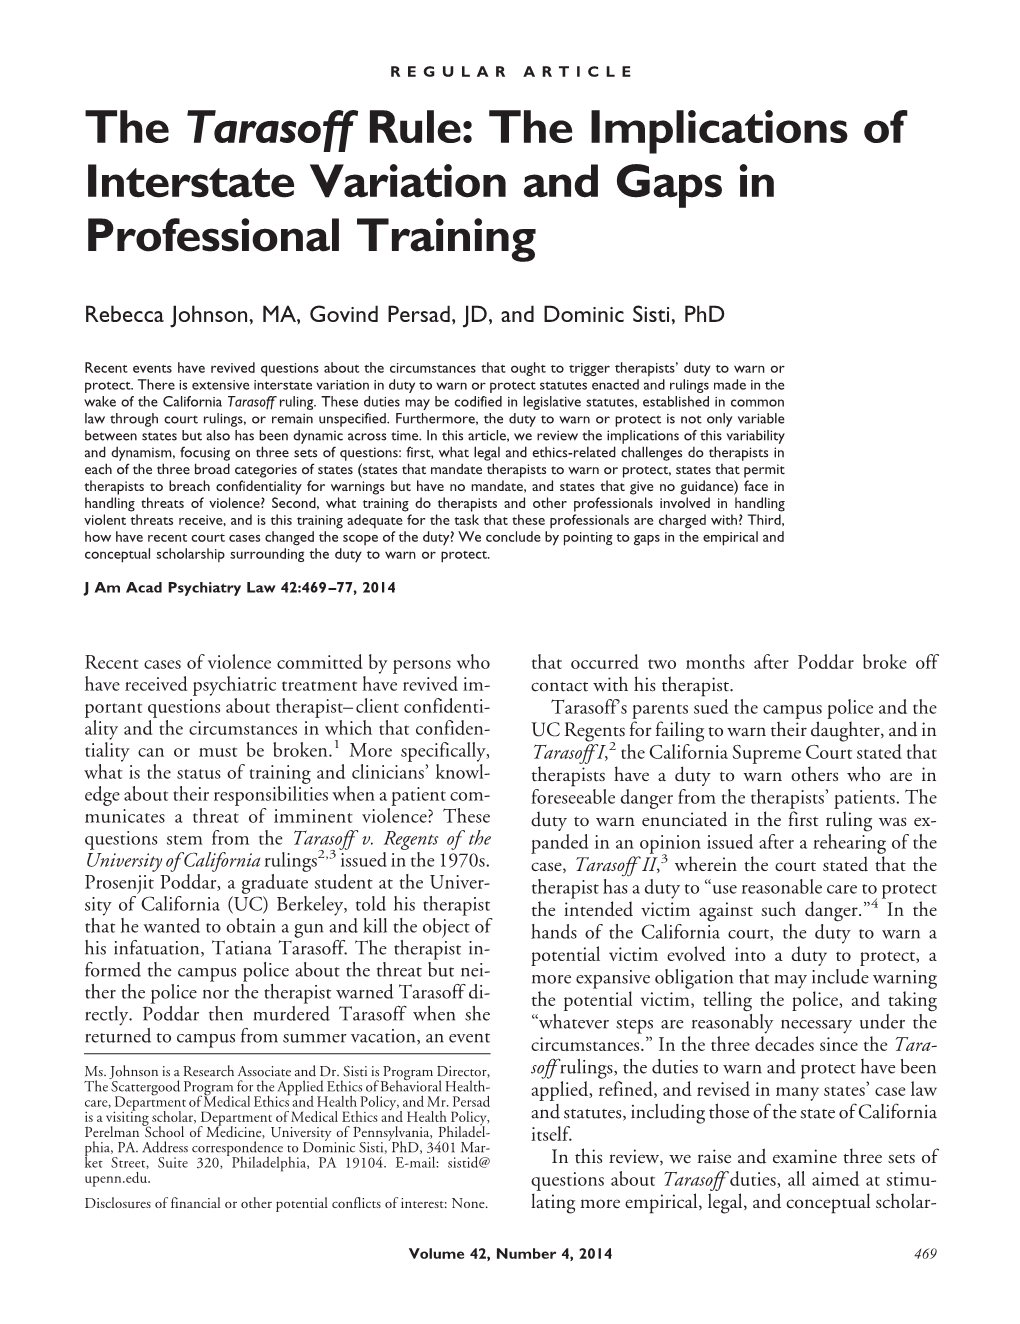 The Tarasoff Rule: the Implications of Interstate Variation and Gaps in Professional Training